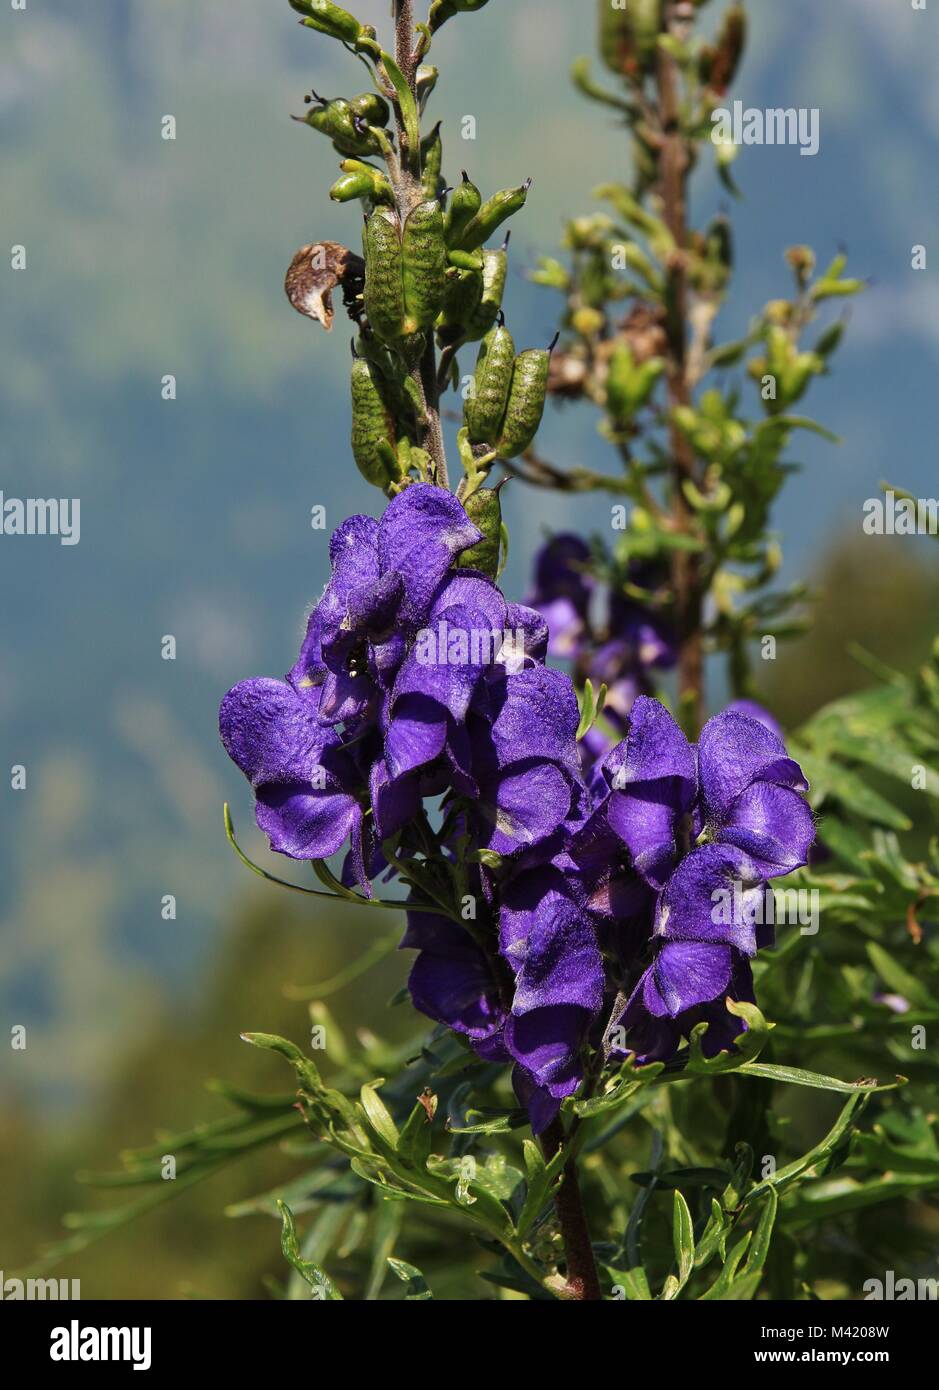 Monkshood, beautiful but very poisonous flower growing in the Alps. Stock Photo